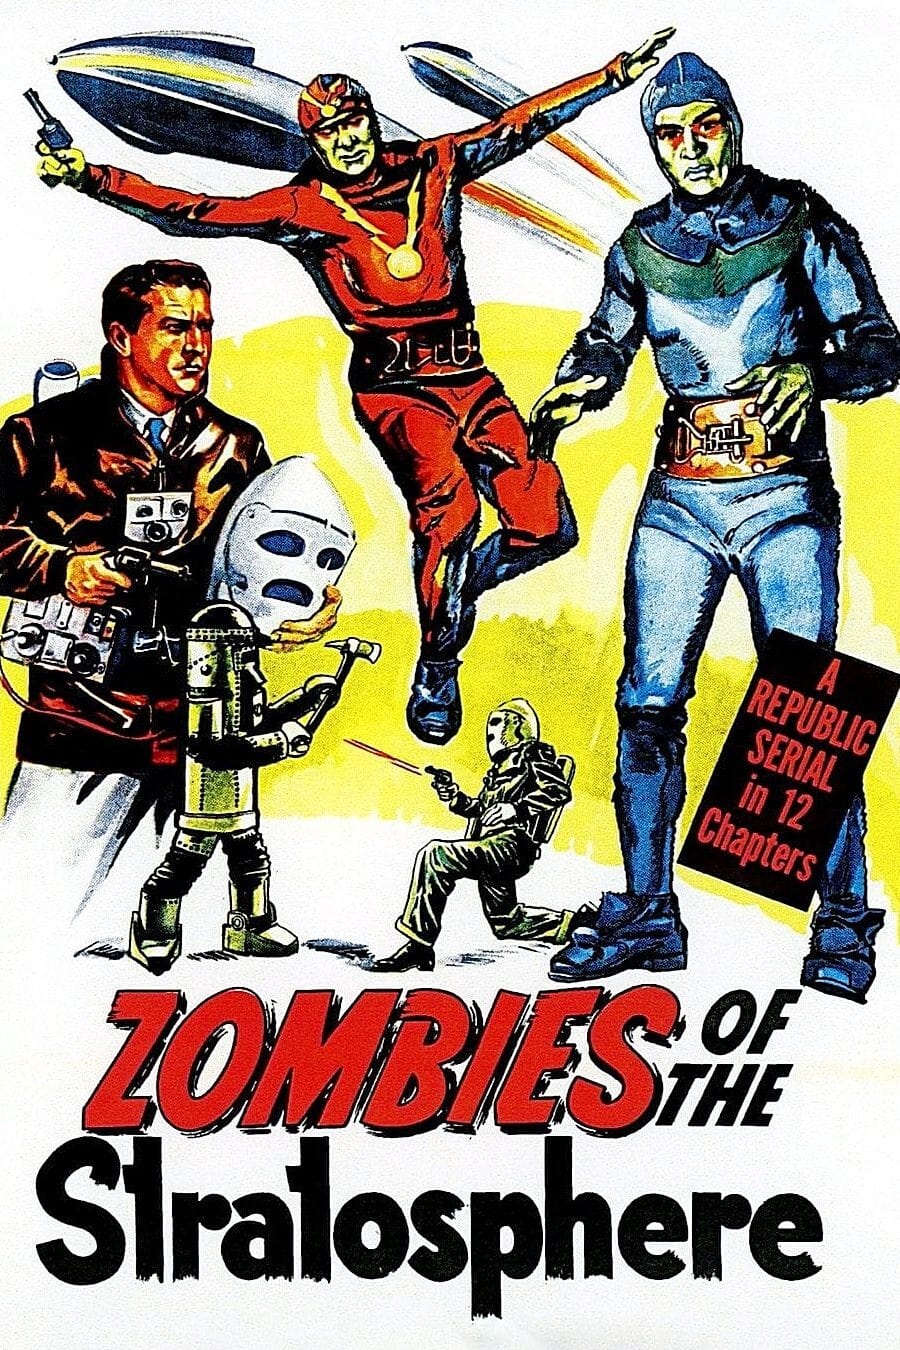 Zombies of the Stratosphere (1952)